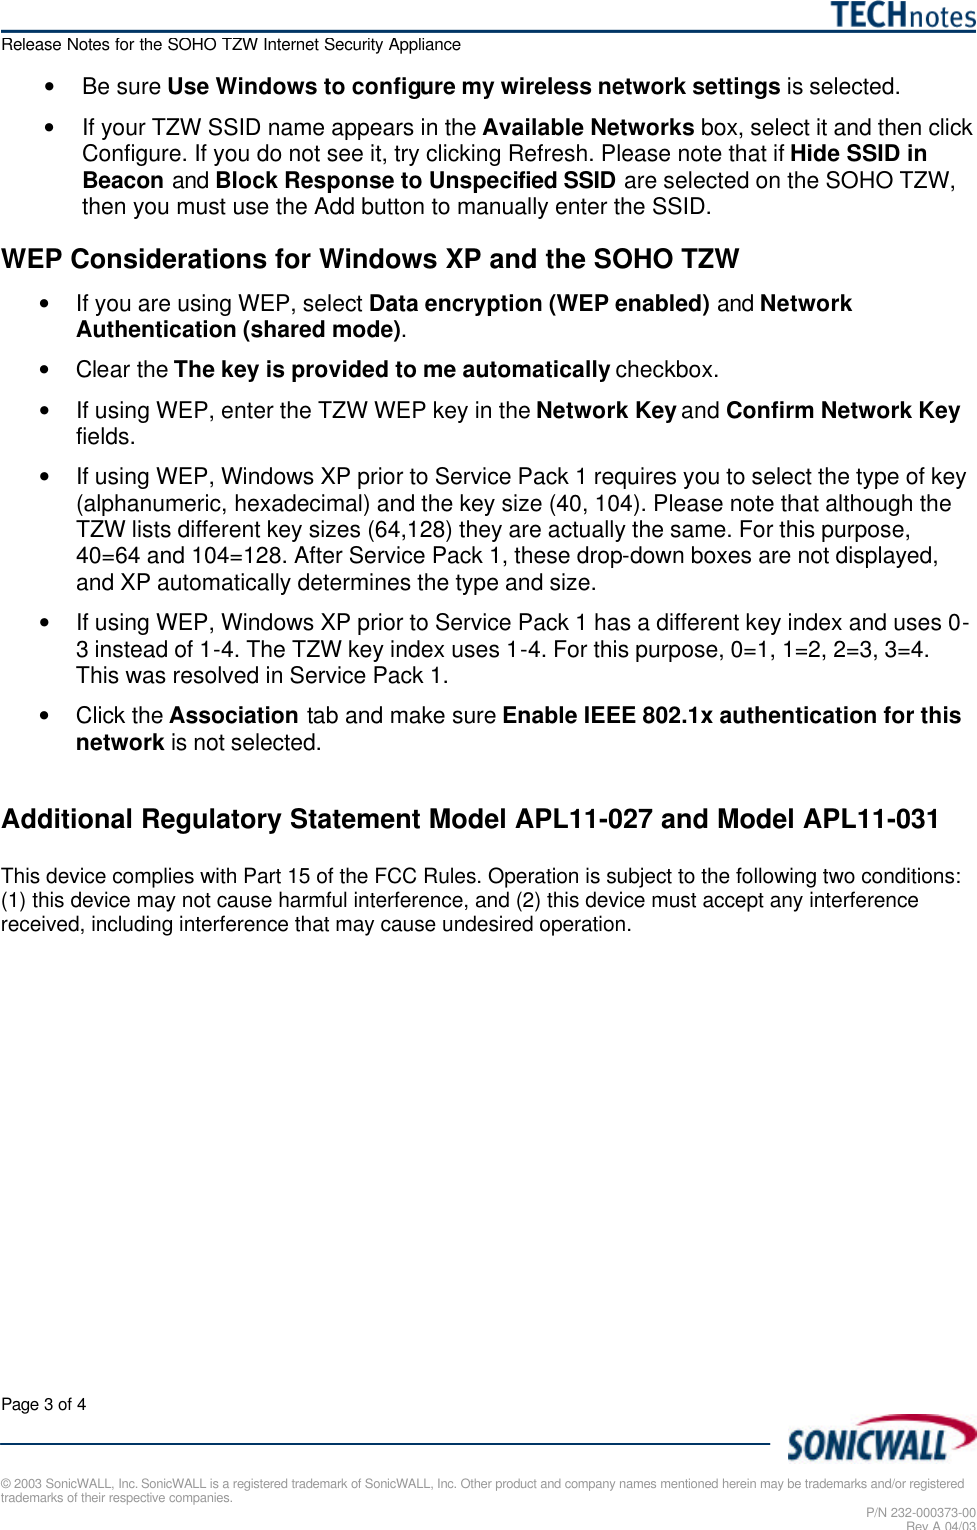   Release Notes for the SOHO TZW Internet Security Appliance Page 3 of 4   © 2003 SonicWALL, Inc. SonicWALL is a registered trademark of SonicWALL, Inc. Other product and company names mentioned herein may be trademarks and/or registered trademarks of their respective companies. P/N 232-000373-00 Rev A 04/03 • Be sure Use Windows to configure my wireless network settings is selected. • If your TZW SSID name appears in the Available Networks box, select it and then click Configure. If you do not see it, try clicking Refresh. Please note that if Hide SSID in Beacon and Block Response to Unspecified SSID are selected on the SOHO TZW, then you must use the Add button to manually enter the SSID. WEP Considerations for Windows XP and the SOHO TZW • If you are using WEP, select Data encryption (WEP enabled) and Network Authentication (shared mode). • Clear the The key is provided to me automatically checkbox.  • If using WEP, enter the TZW WEP key in the Network Key and Confirm Network Key fields. • If using WEP, Windows XP prior to Service Pack 1 requires you to select the type of key (alphanumeric, hexadecimal) and the key size (40, 104). Please note that although the TZW lists different key sizes (64,128) they are actually the same. For this purpose, 40=64 and 104=128. After Service Pack 1, these drop-down boxes are not displayed, and XP automatically determines the type and size. • If using WEP, Windows XP prior to Service Pack 1 has a different key index and uses 0-3 instead of 1-4. The TZW key index uses 1-4. For this purpose, 0=1, 1=2, 2=3, 3=4. This was resolved in Service Pack 1. • Click the Association tab and make sure Enable IEEE 802.1x authentication for this network is not selected.  Additional Regulatory Statement Model APL11-027 and Model APL11-031  This device complies with Part 15 of the FCC Rules. Operation is subject to the following two conditions: (1) this device may not cause harmful interference, and (2) this device must accept any interference received, including interference that may cause undesired operation.  